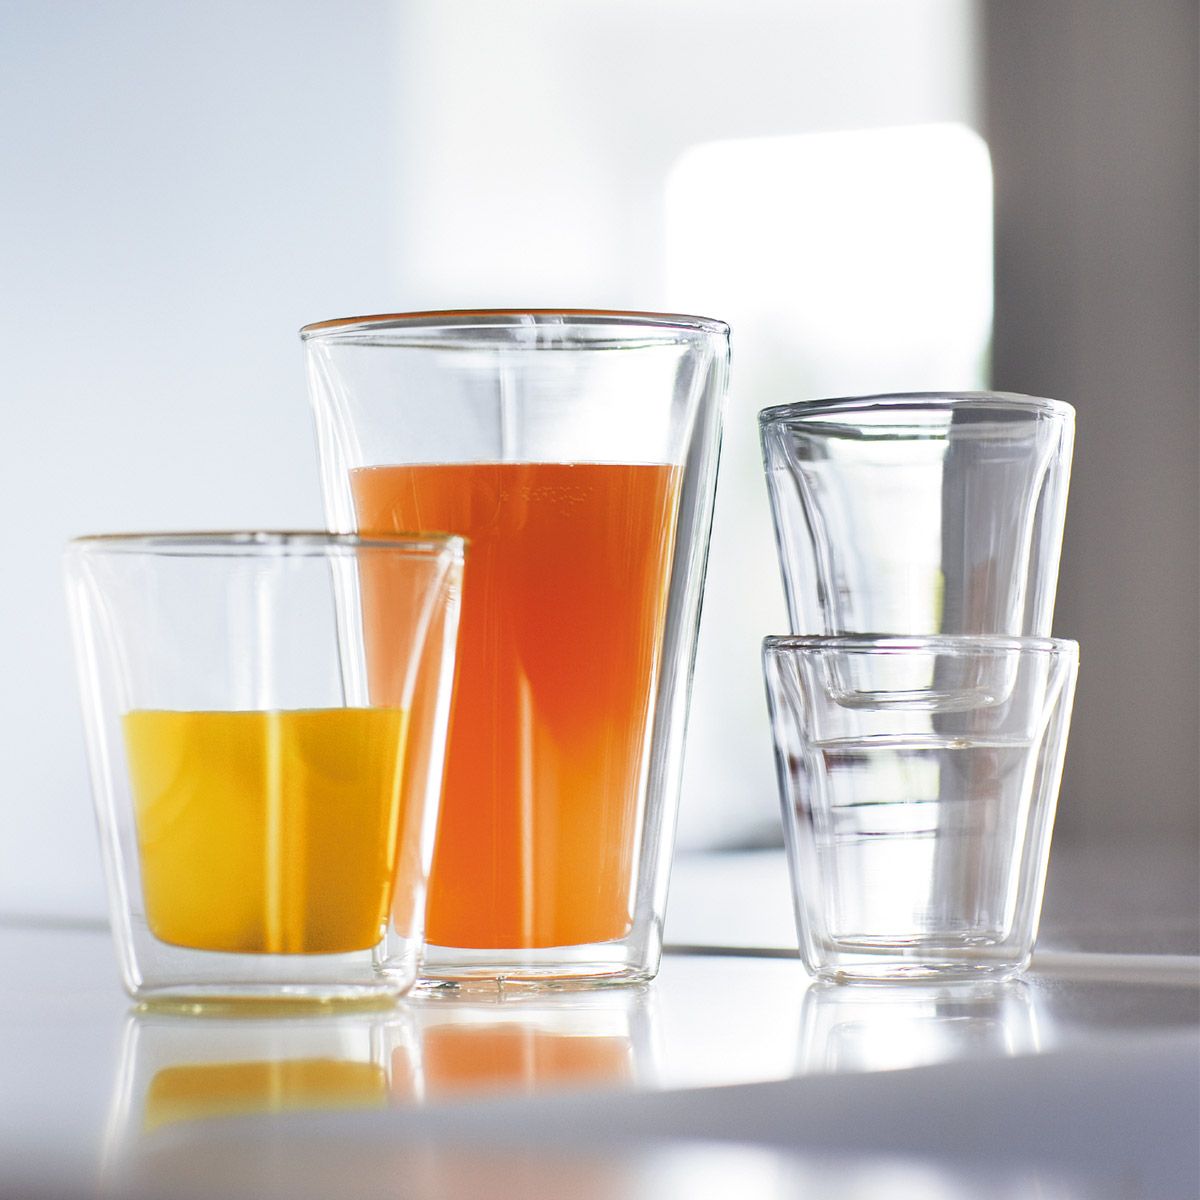 Double Wall Glasses CANTEEN - 6 pieces set 0.4 L